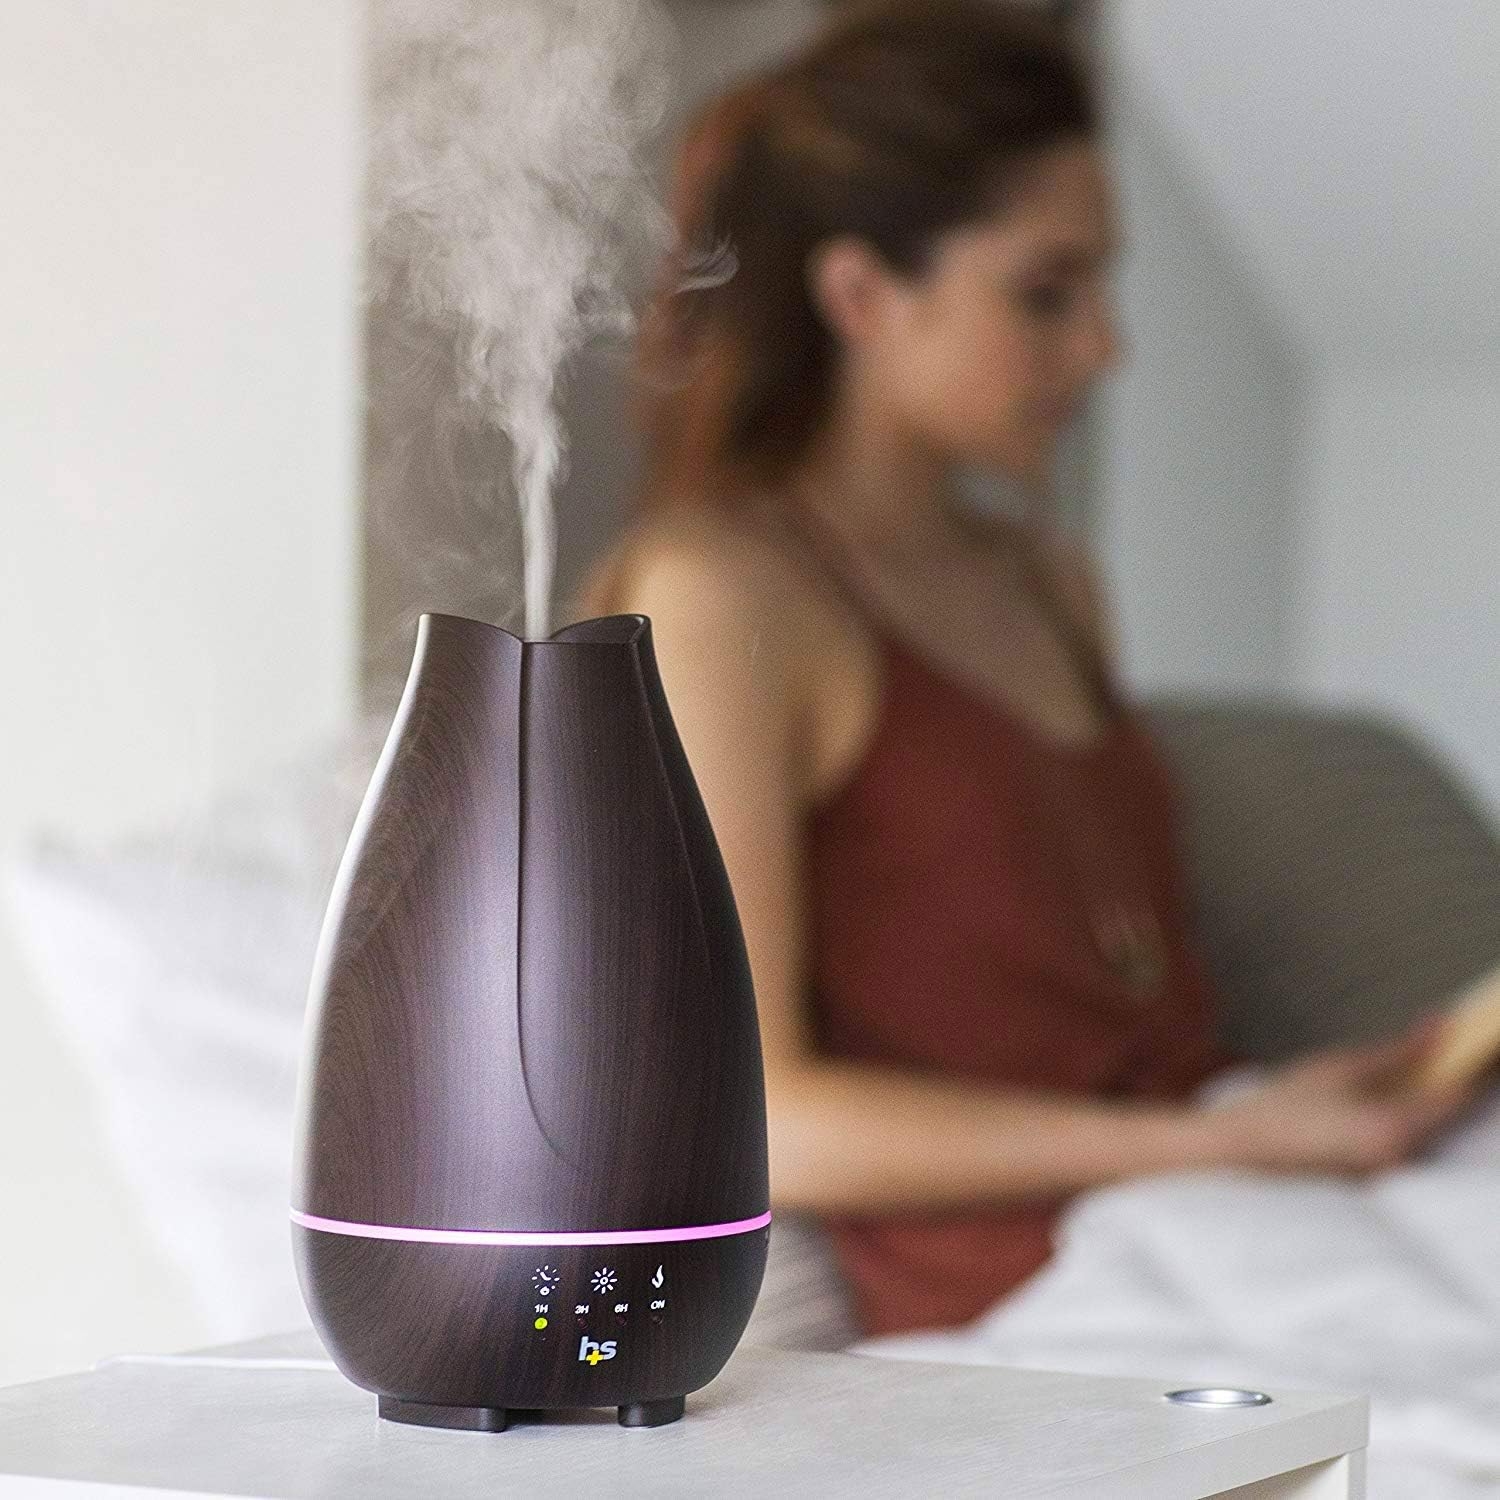 HealthSmart Essential Oil Diffuser, Cool Mist Humidifier and Aromatherapy Diffuser with 500ML Tank Ideal for Large Rooms, Adjustable Timer, Mist Mode and 7 LED Light Colors, Brown